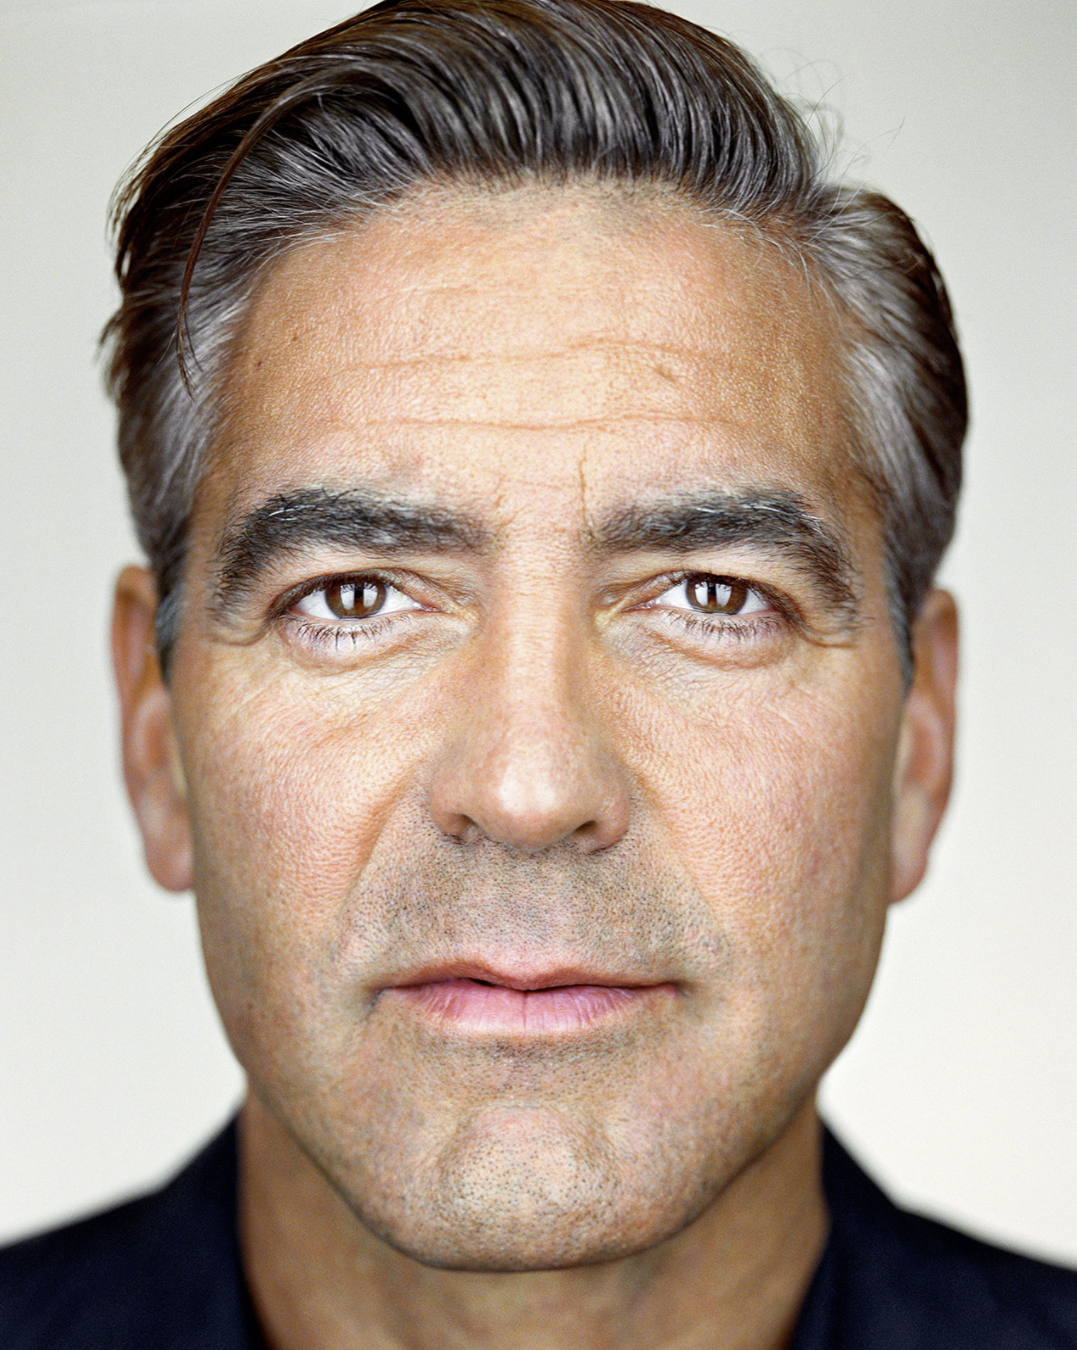 Actor George Clooney, looking straight at the camera